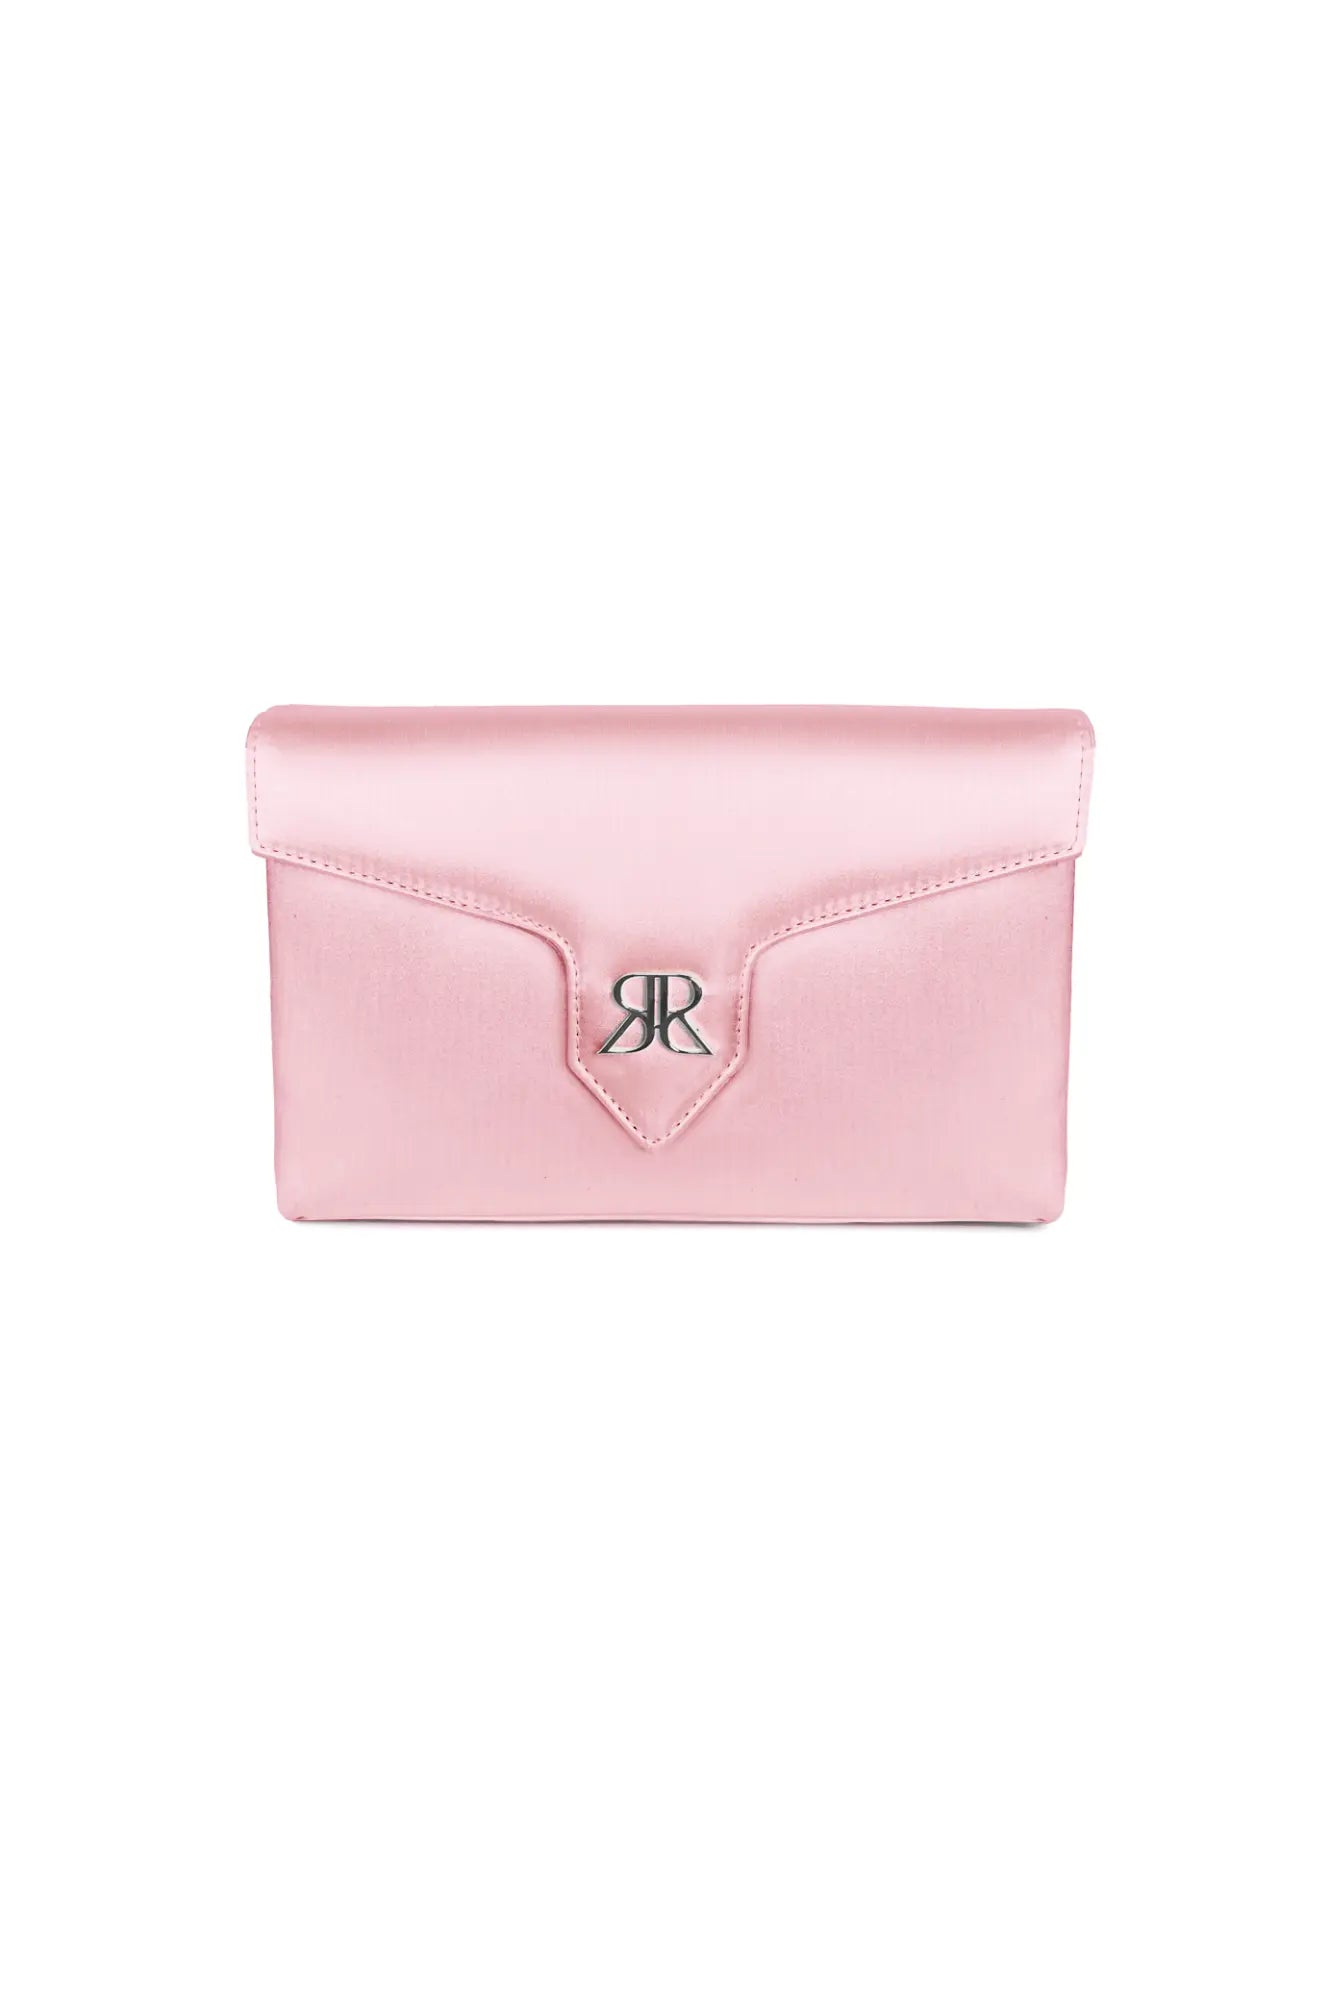 Love Note Envelope clutch purse with logo clasp on a white background by The Bella Rosa Collection.